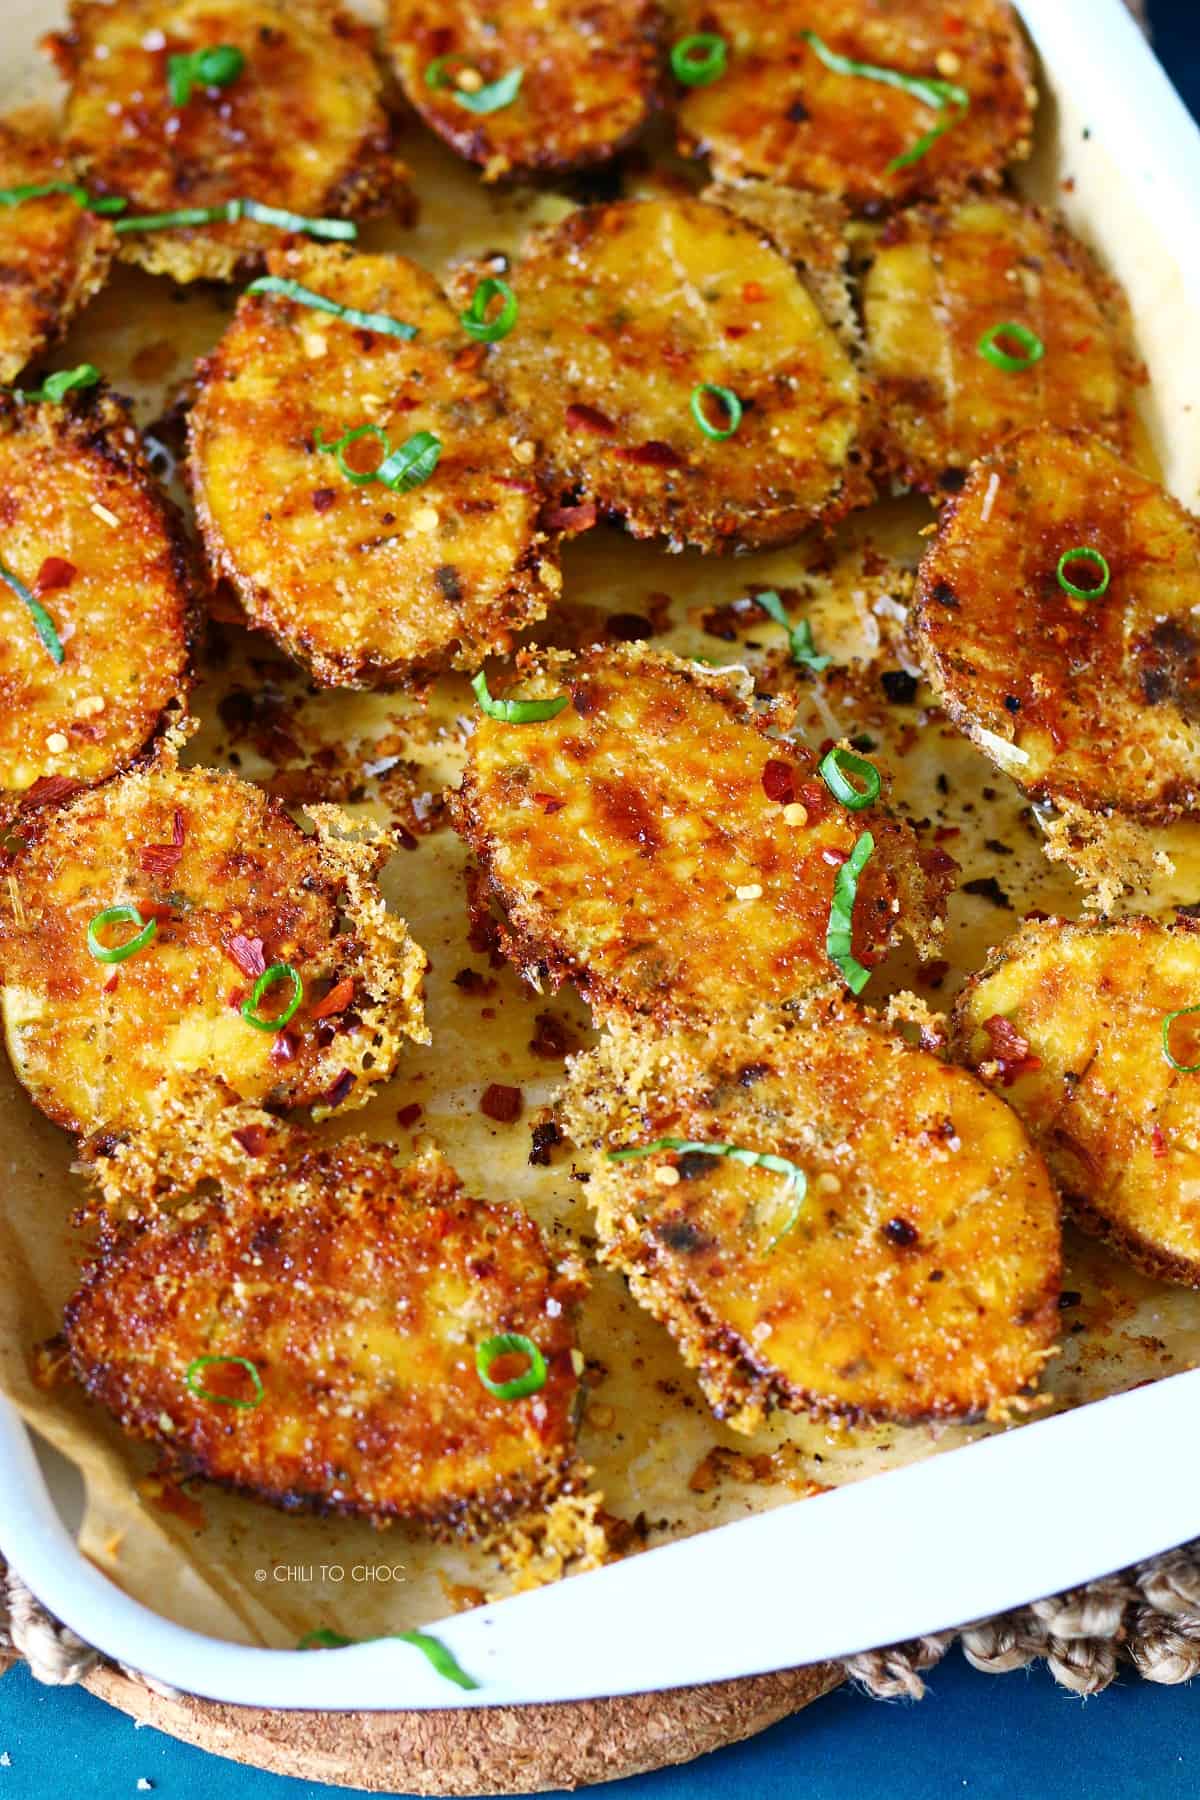 Crispy Parmesan crusted potatoes on a baking tray garnished with chopped green onion.